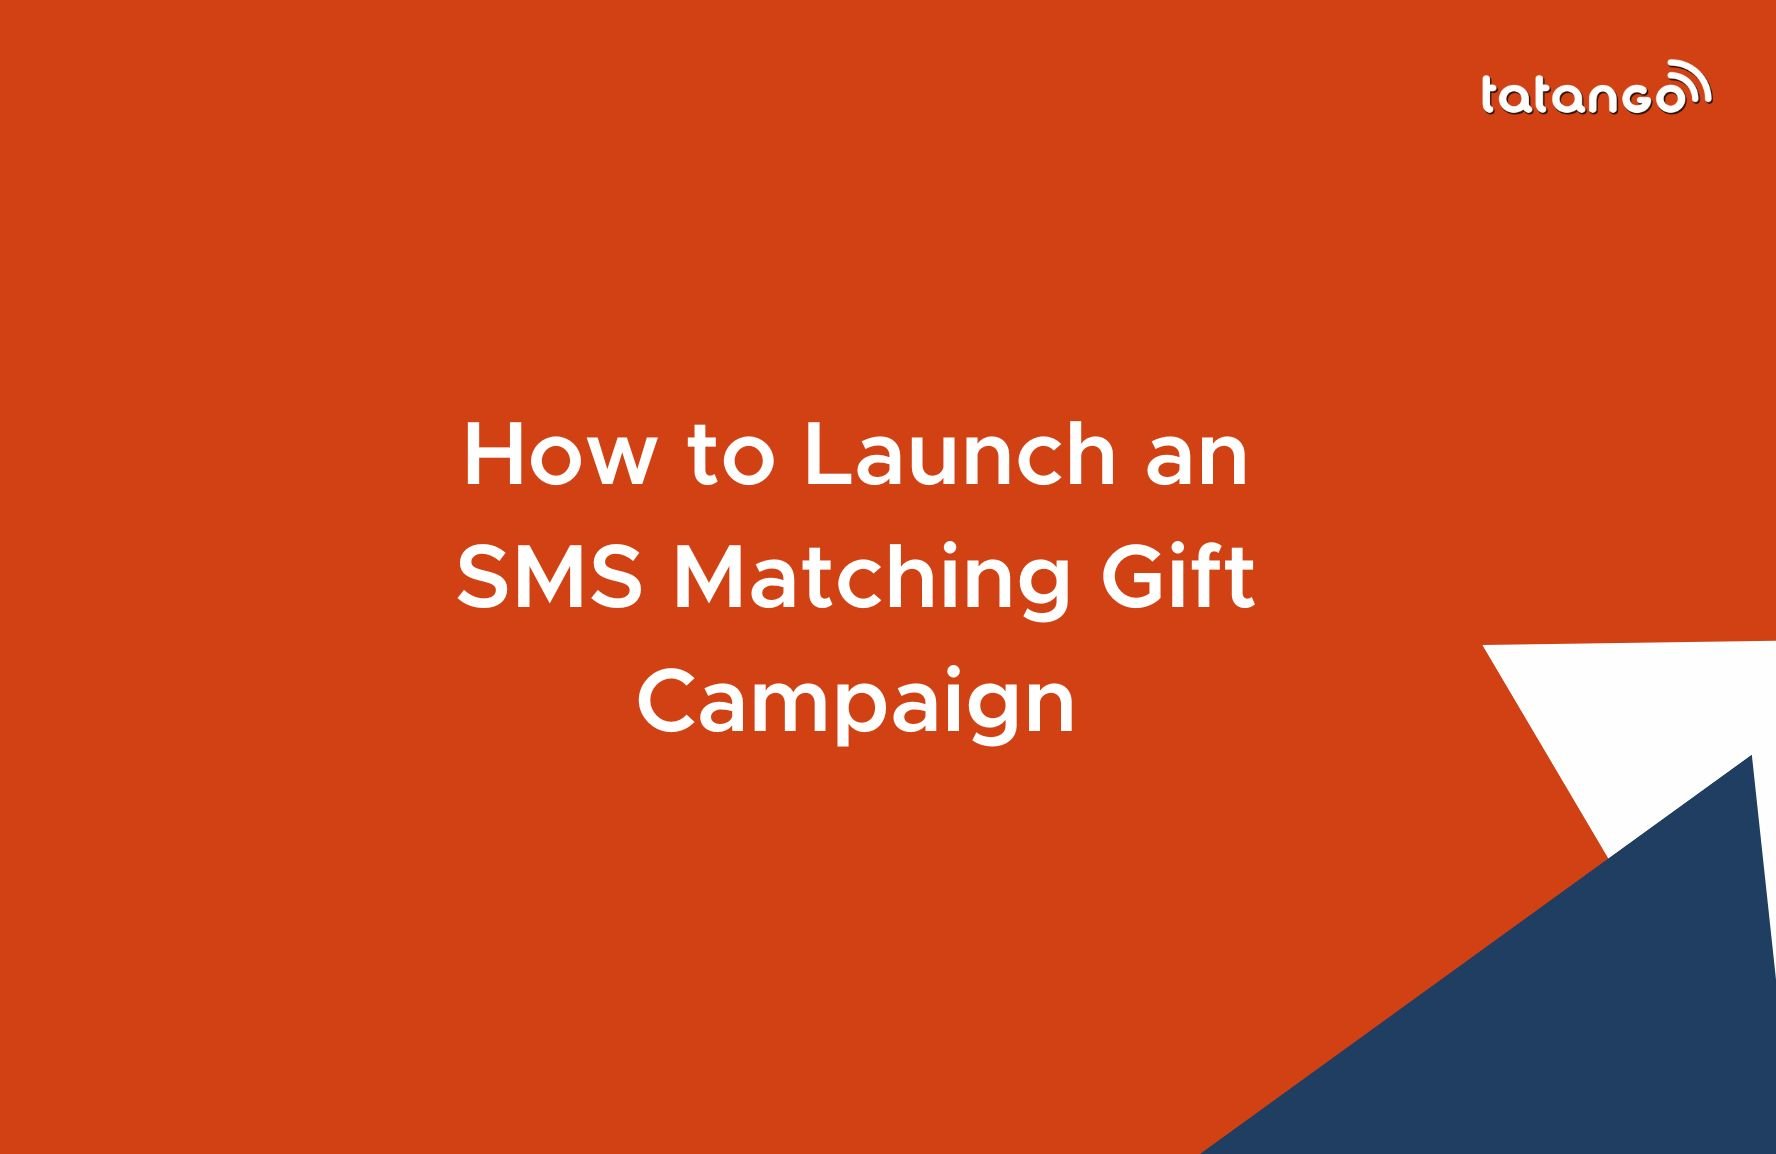 How to Launch an SMS Matching Gift Campaign